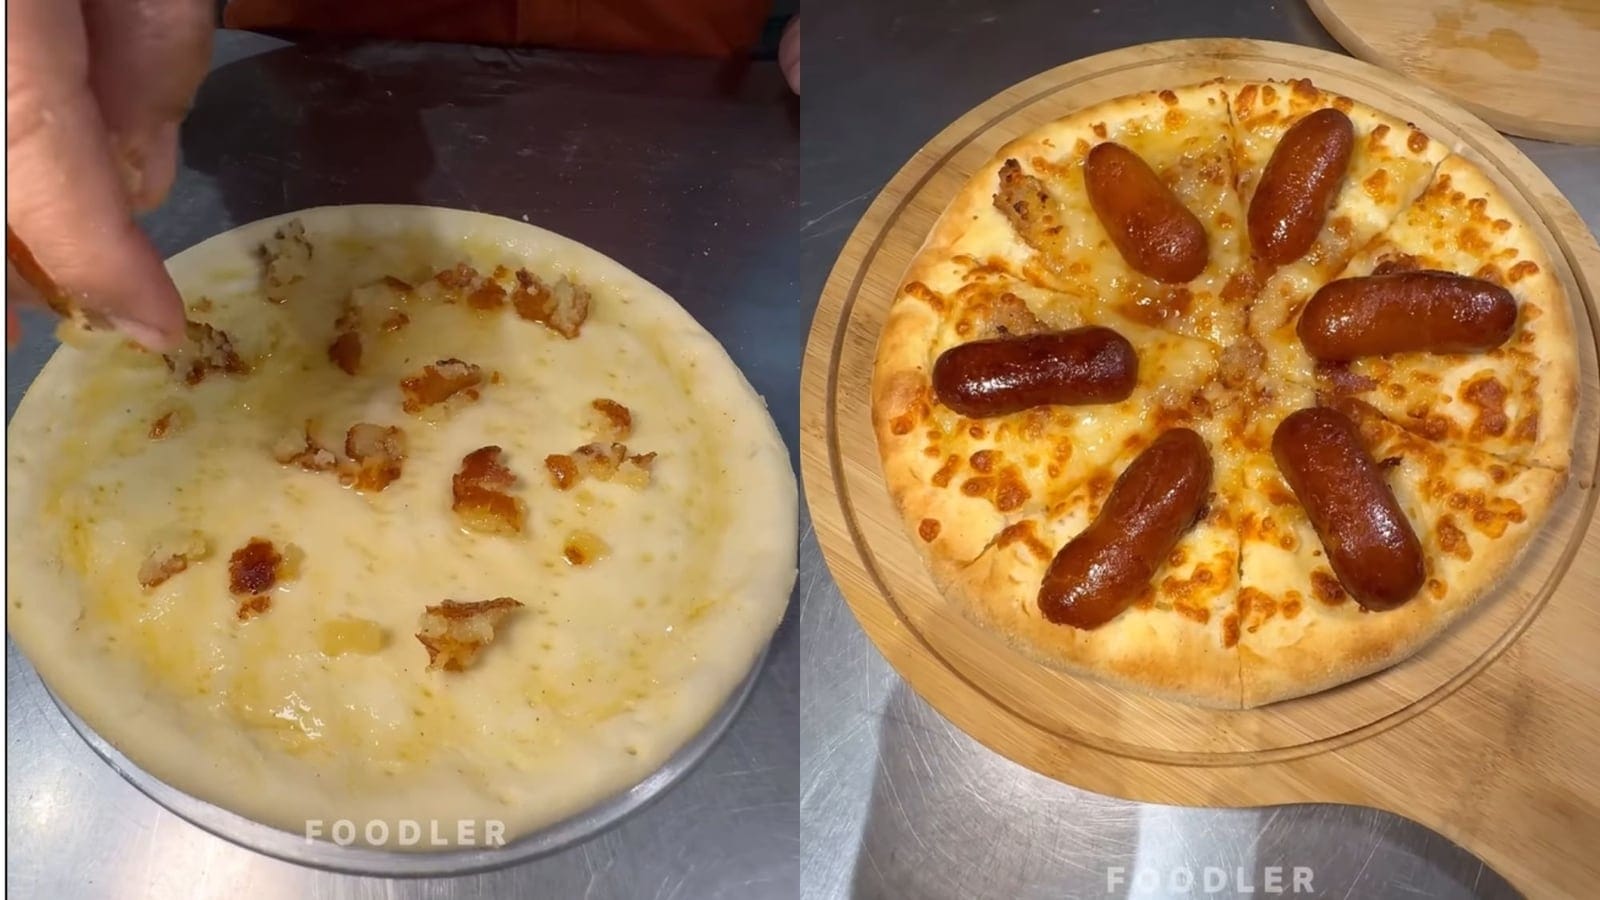 Cheesy gulab jamun pizza offends food lovers, they say it’s ‘time to leave the planet’